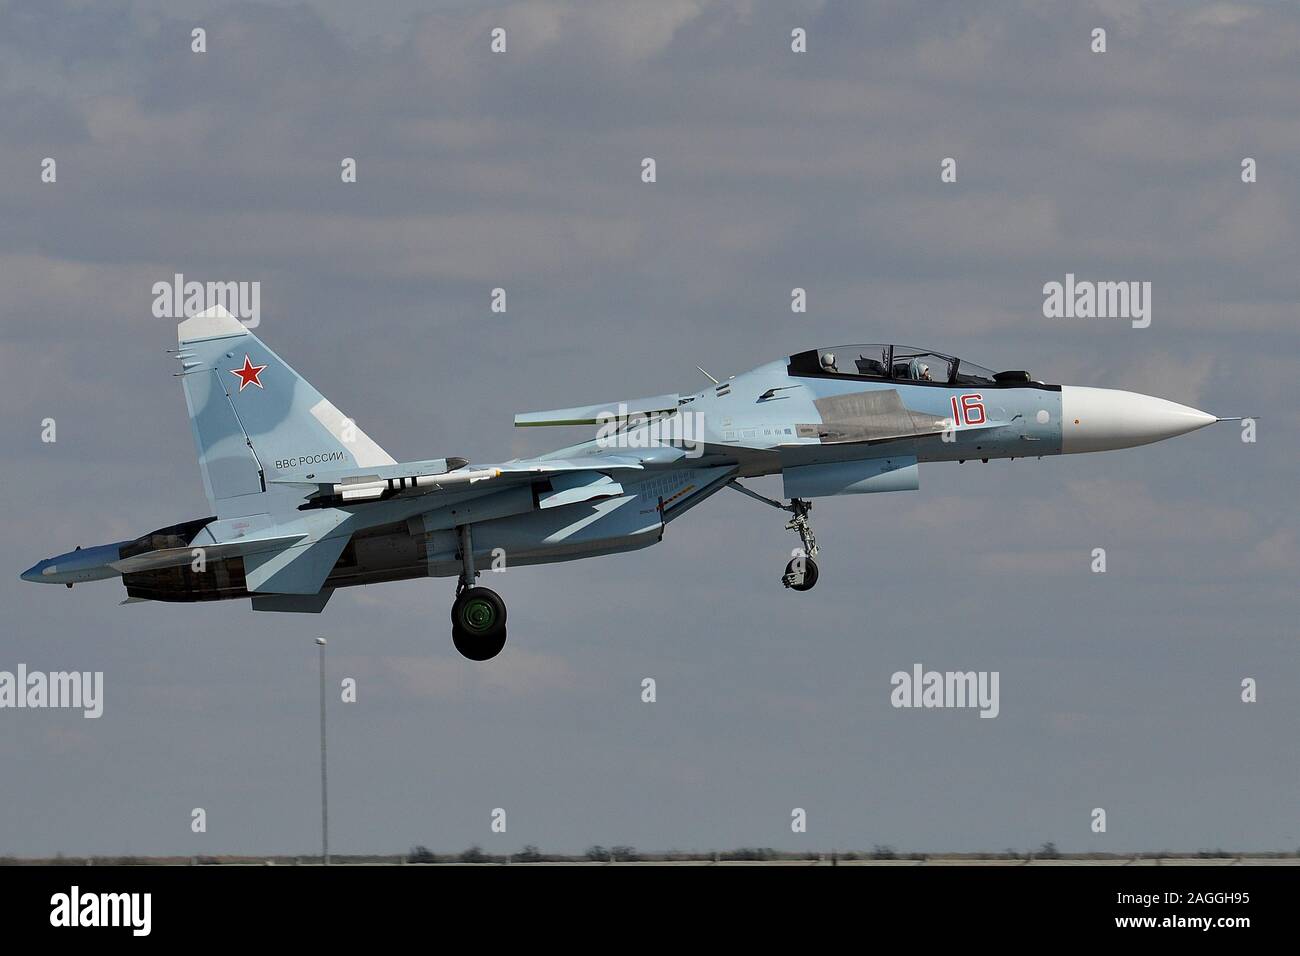 RUSSIAN AIR FORCE SUKHOI SU-30 FIGHTER AIRCRAFT. Stock Photo